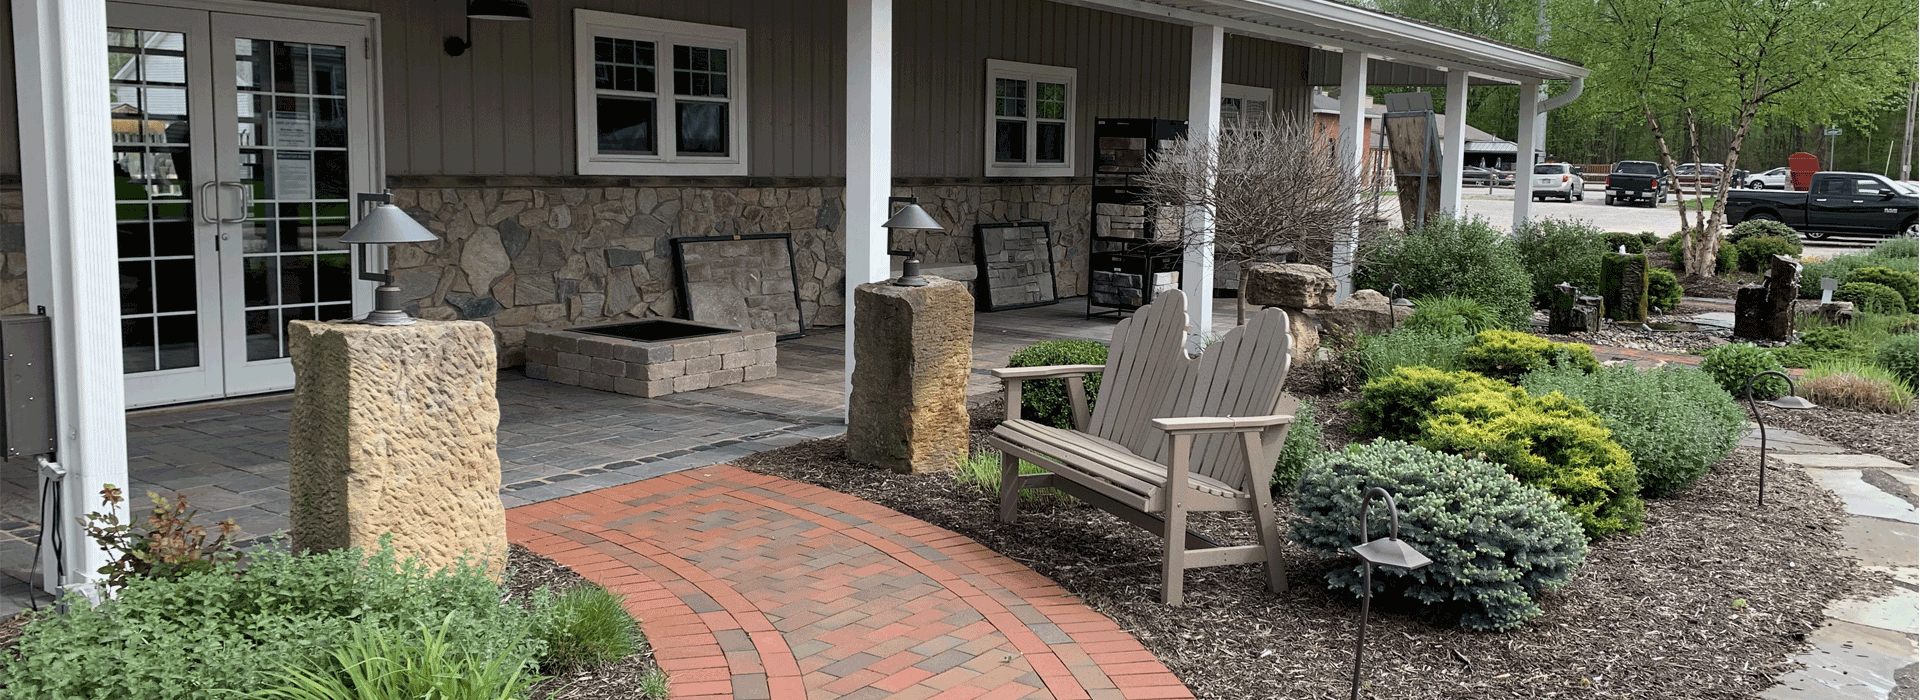 Valley City Supply Ohio showroom with patio paver block walkways and display gardens